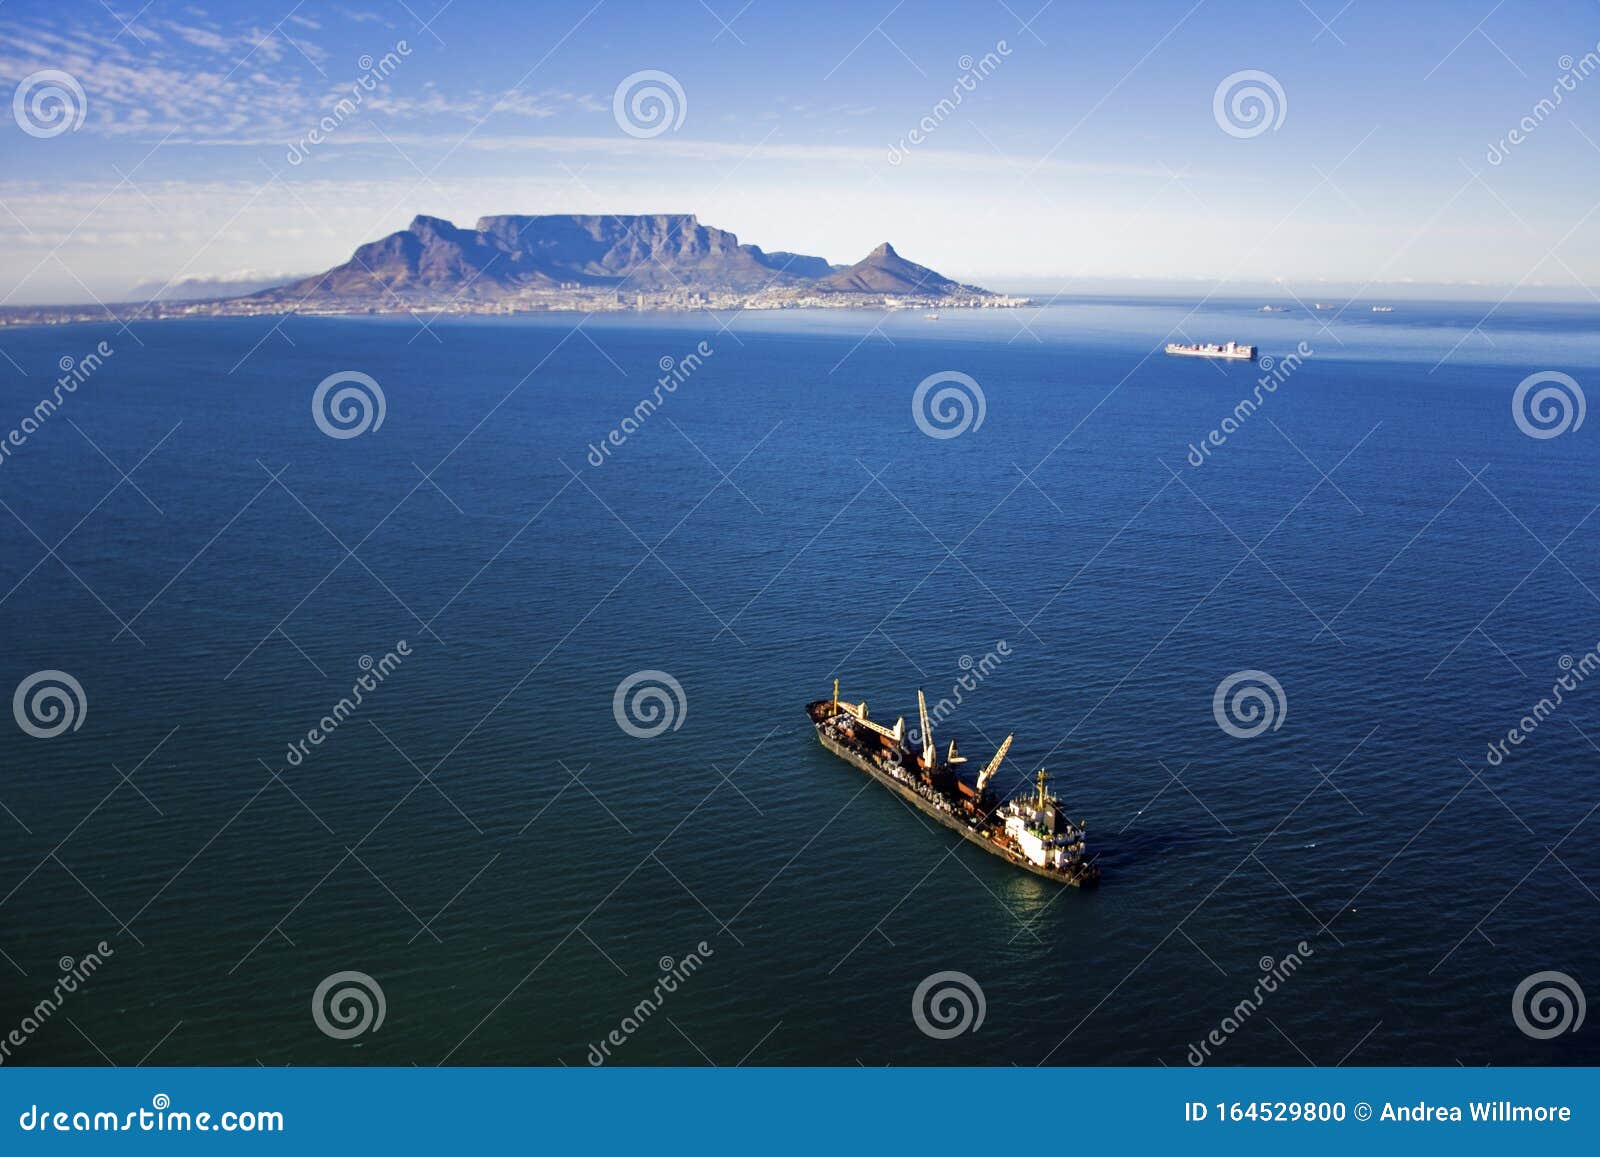 aerial view of ship in table bay with table mountain